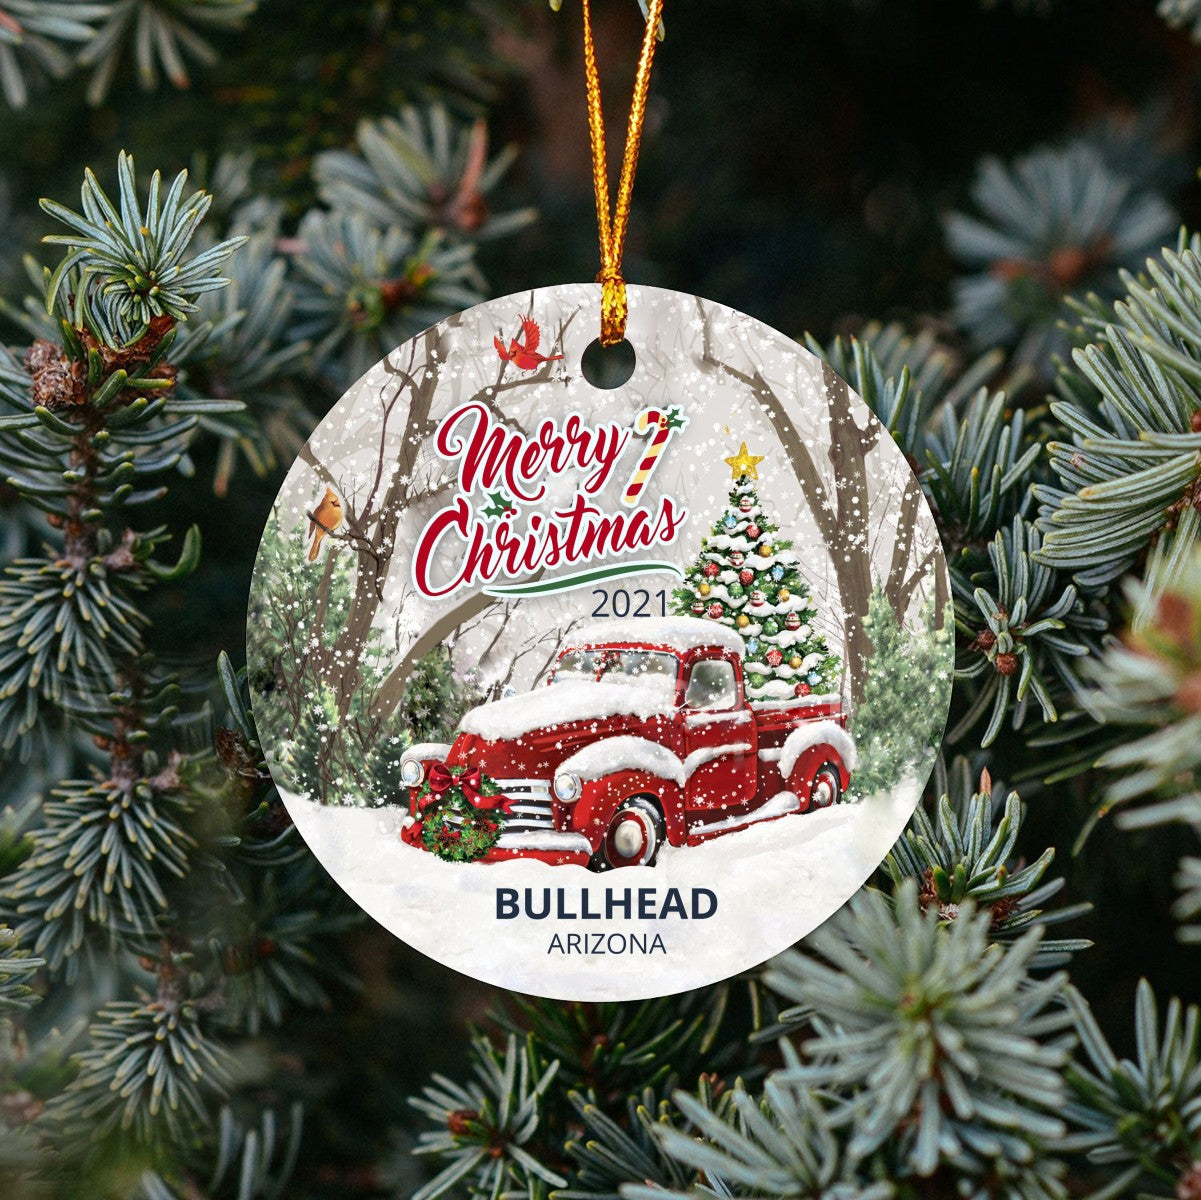 Christmas Tree Ornaments Bullhead - Ornament Customize With Name City And State Bullhead Arizona AZ - Red Truck Xmas Ornaments 3'' Plastic Gift For Family, Friend And Housewarming